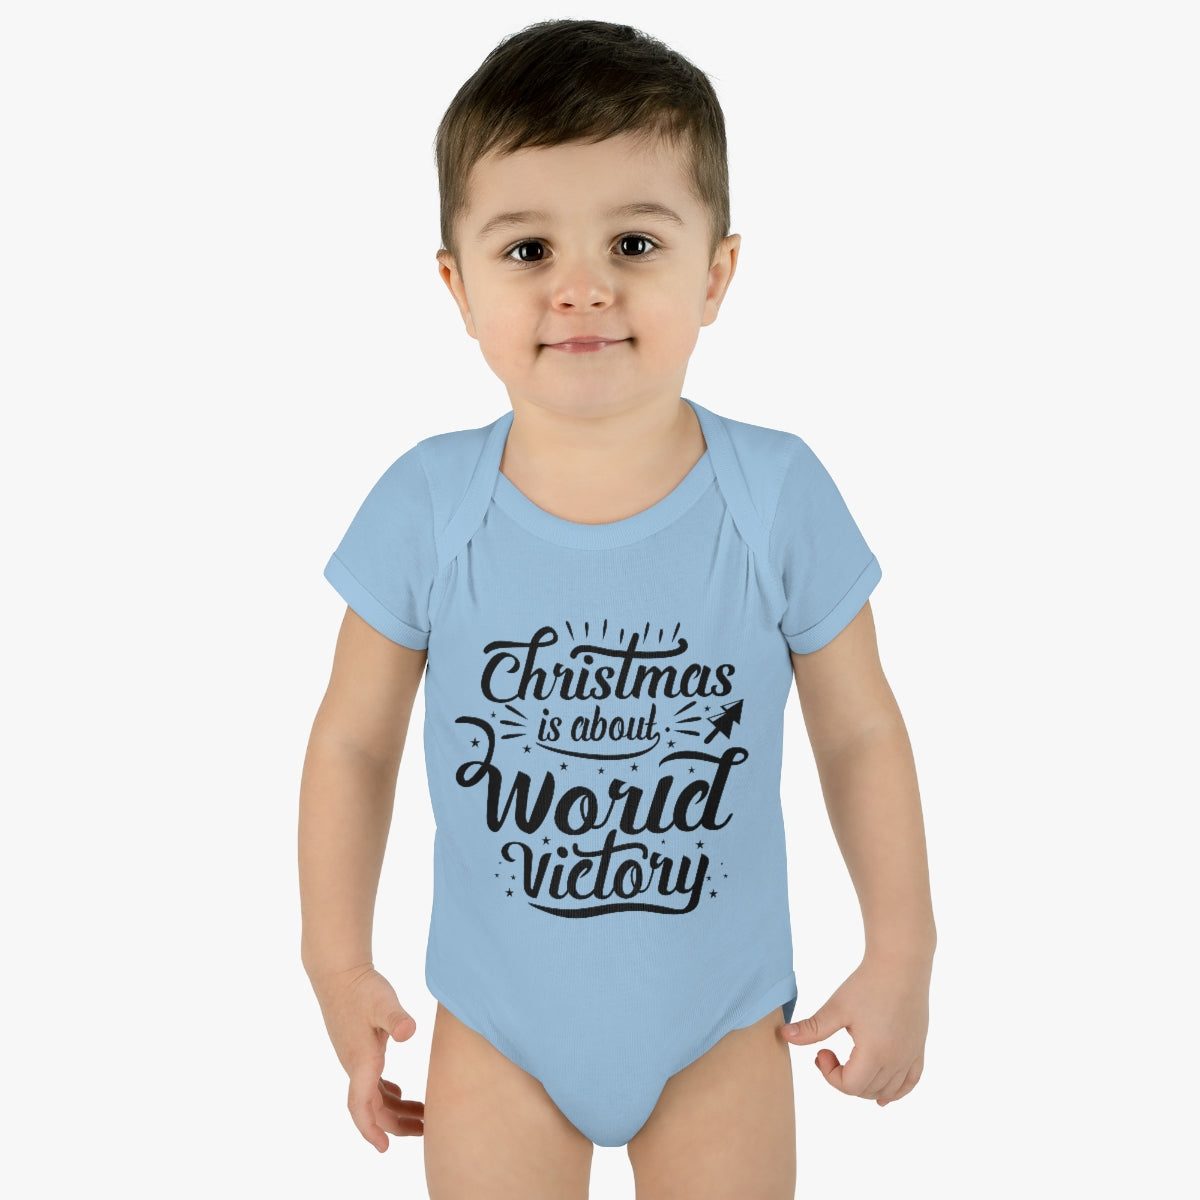 Christmas is about Hope victory Baby Bodysuit, Merry Christmas, Christmas Baby Bodysuit, Infant Bodysuit, Merry Christmas Baby Bodysuit